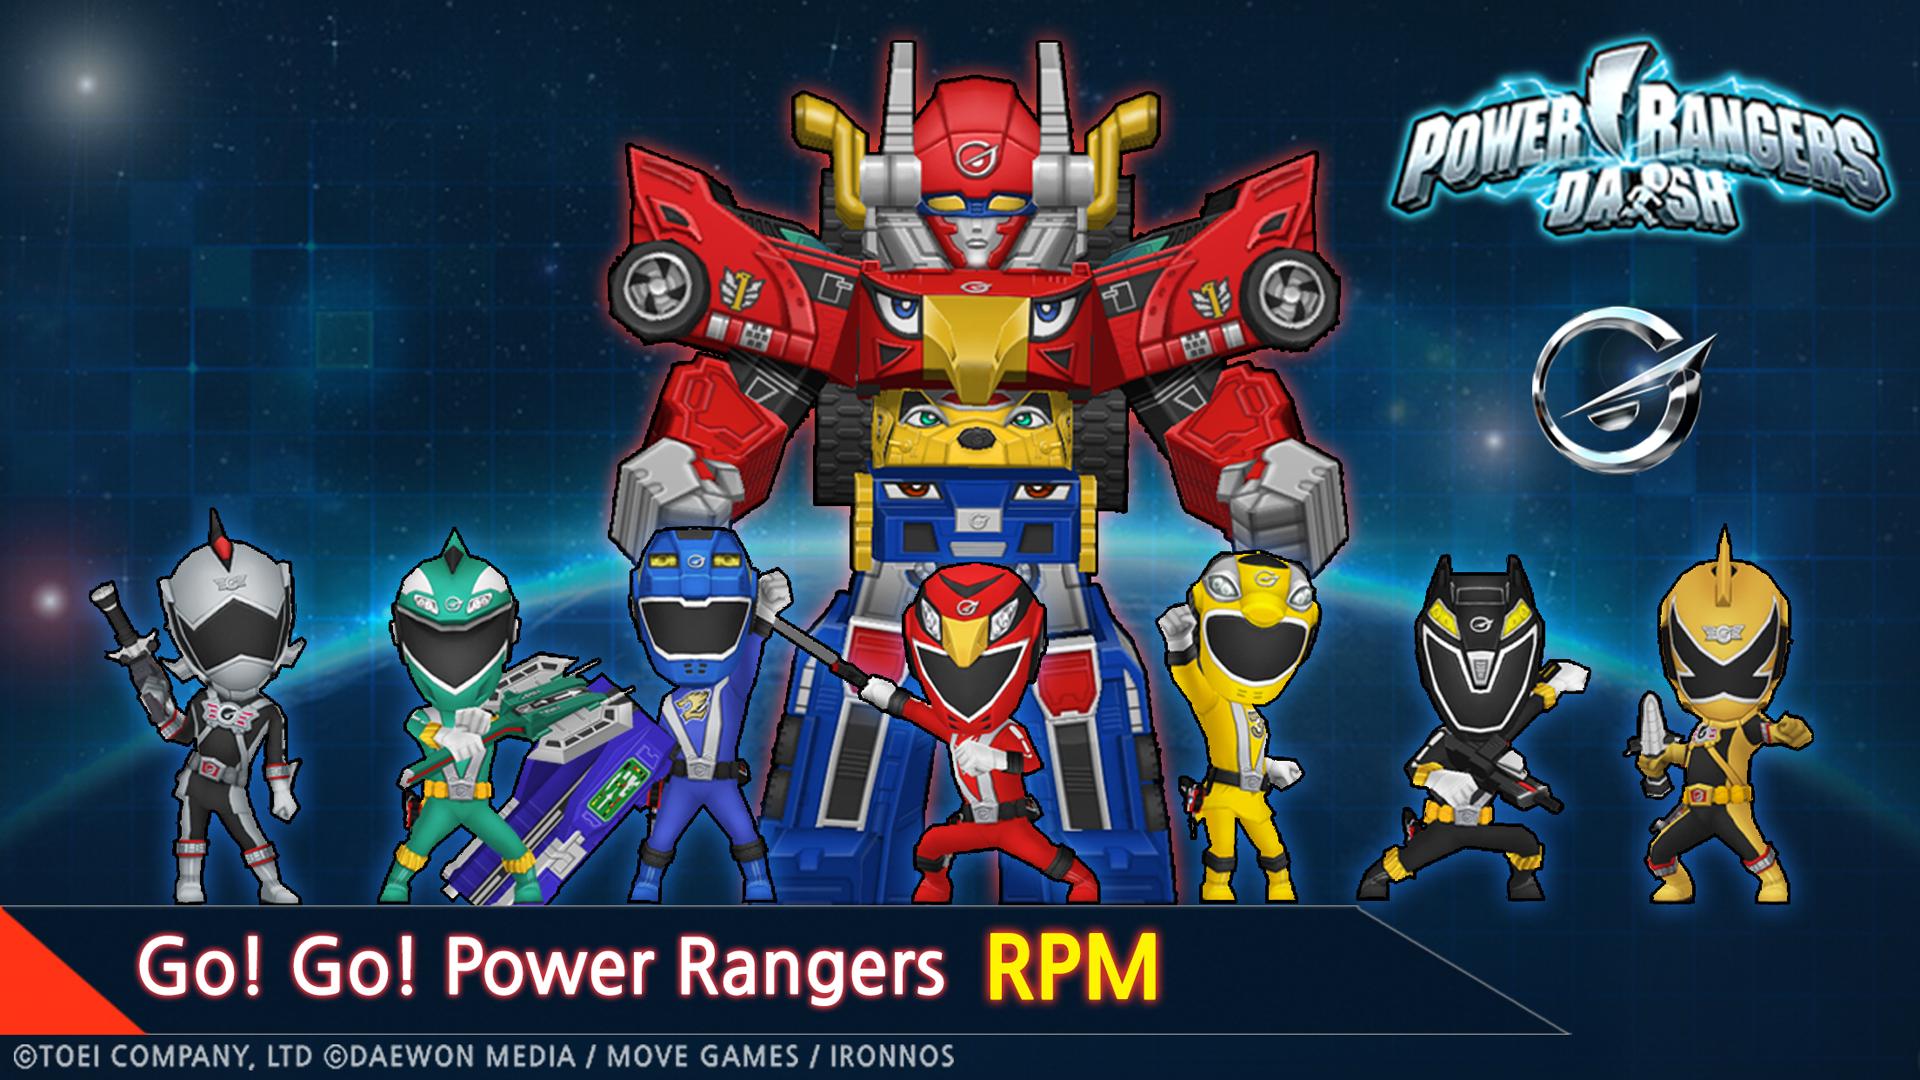 Power Rangers Dash for Android